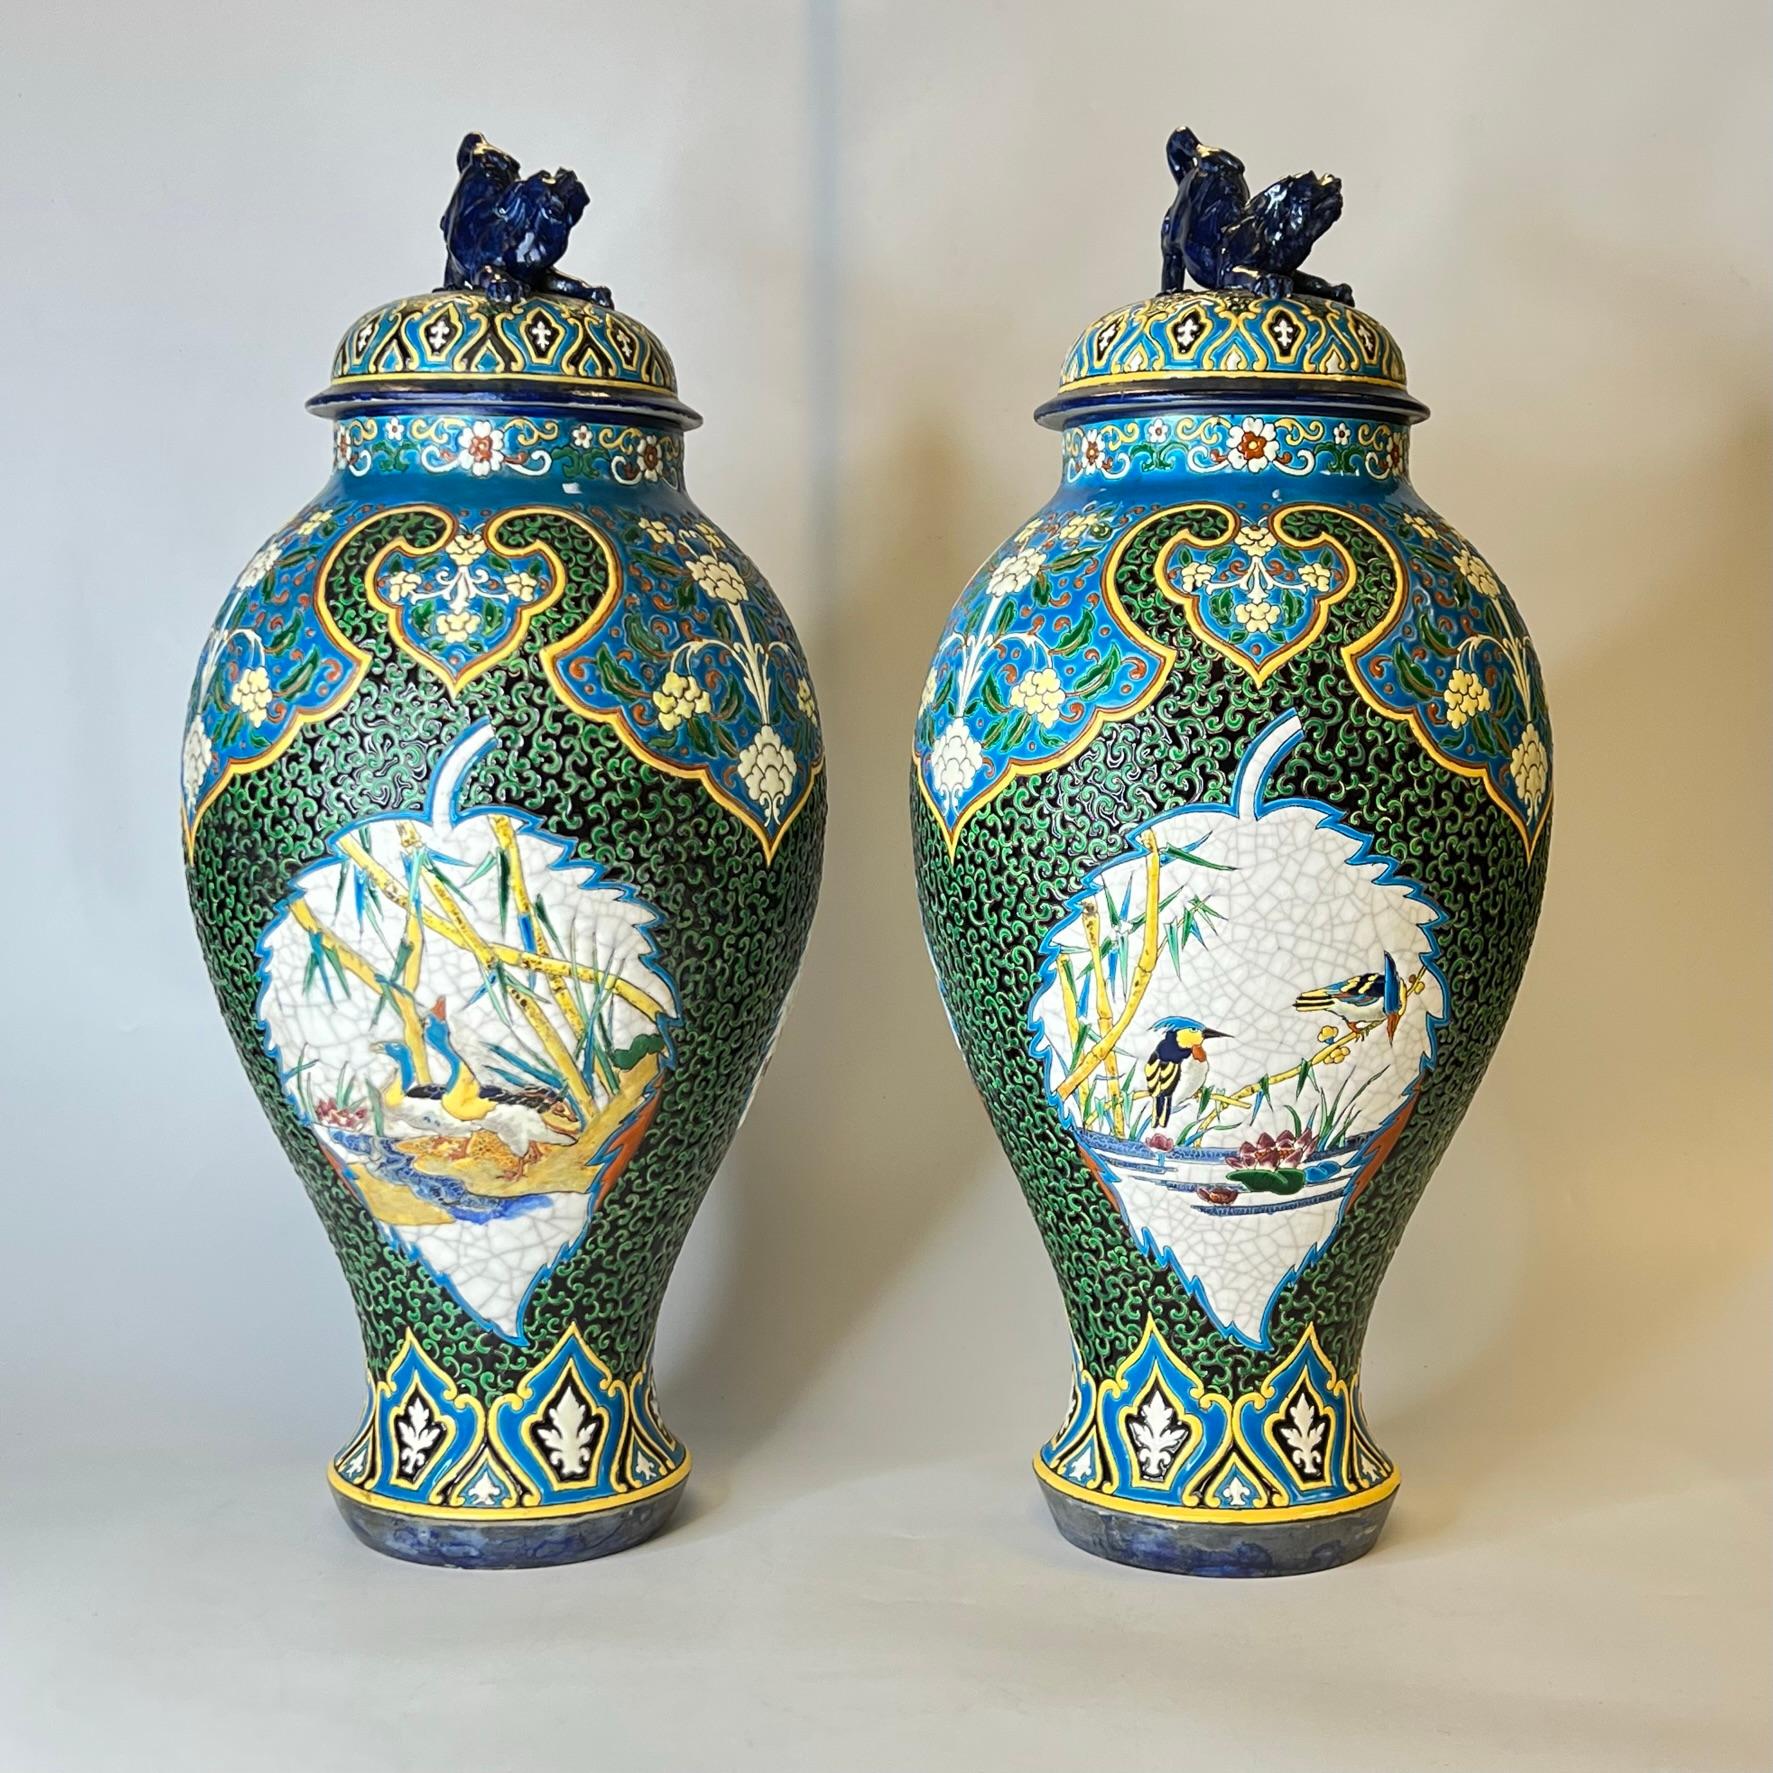 Pair 19th Century French Faience Vases by J. Vieillard & Co with Islamic Motifs 1